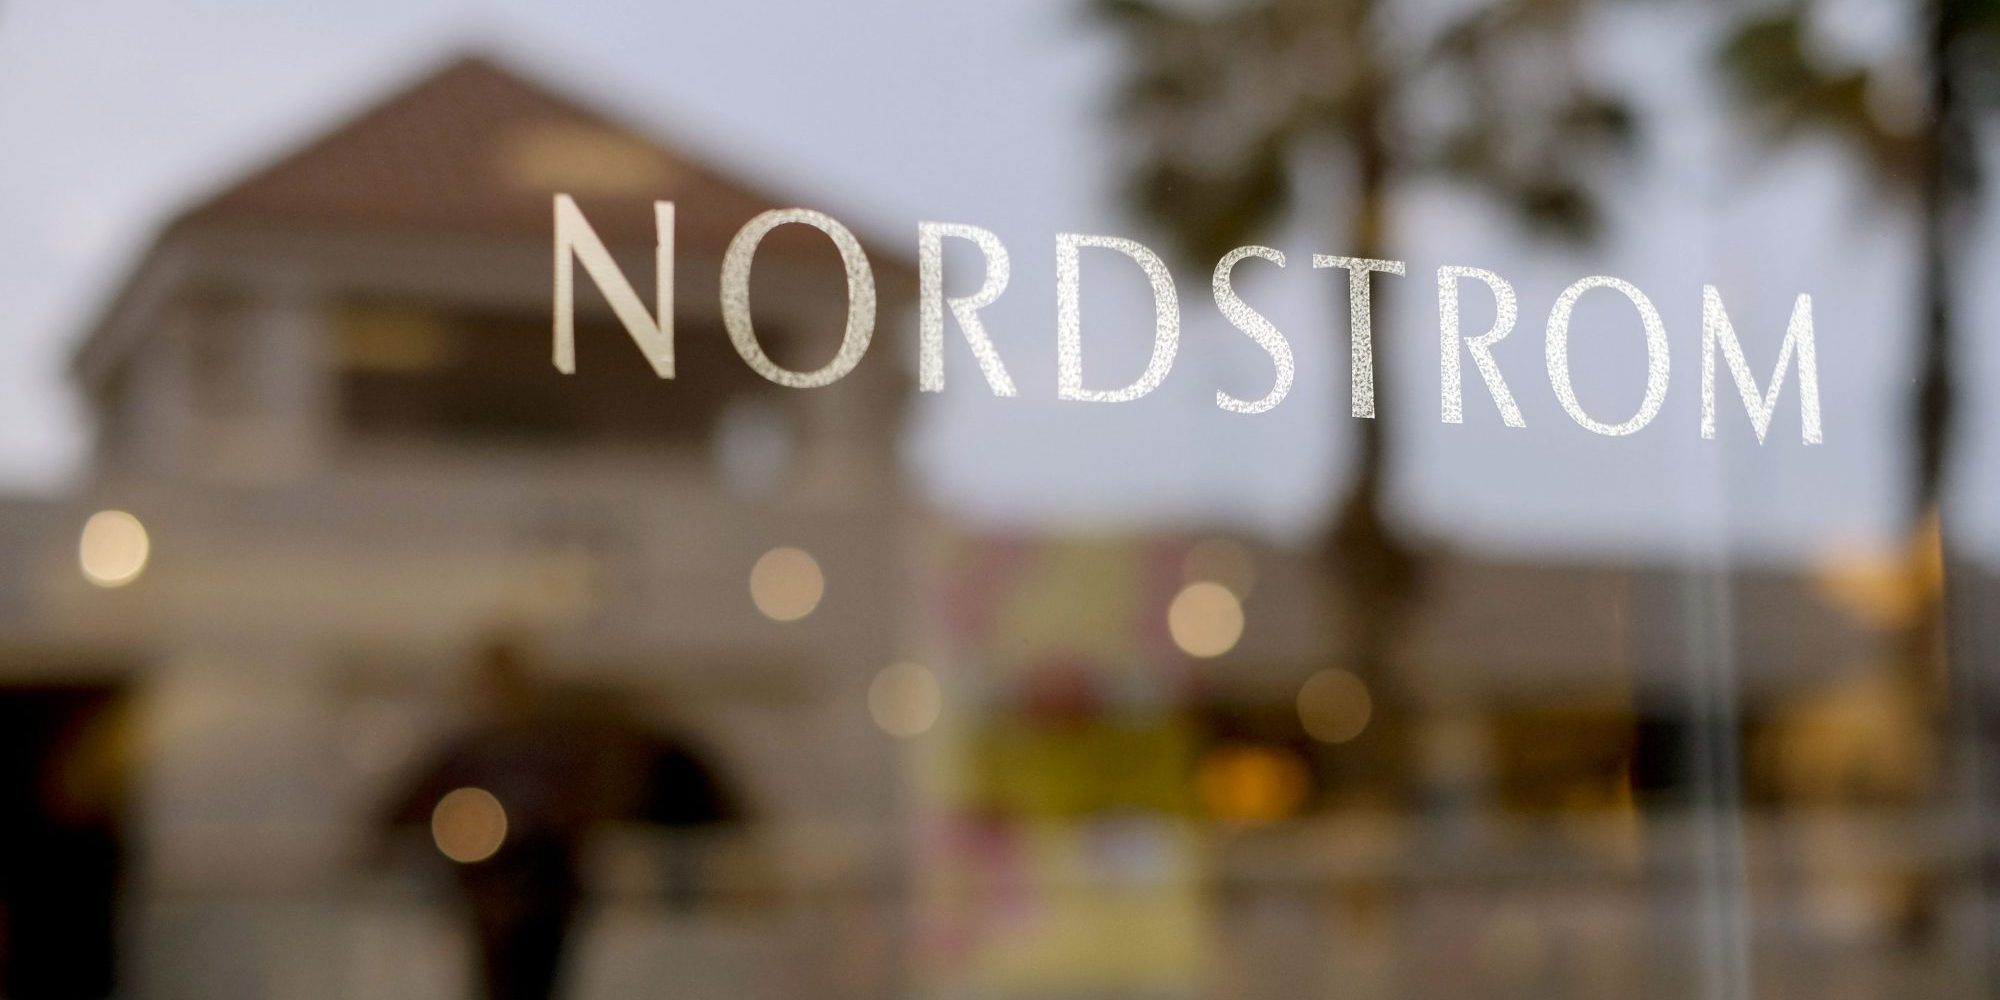 FILE - This May 9, 2013 file photo shows a Nordstrom sign at a shopping mall in Brea, Calif. Nordstrom is expected to report quarterly results on Friday, Nov. 15, 2013. (AP Photo/Jae C. Hong, File)